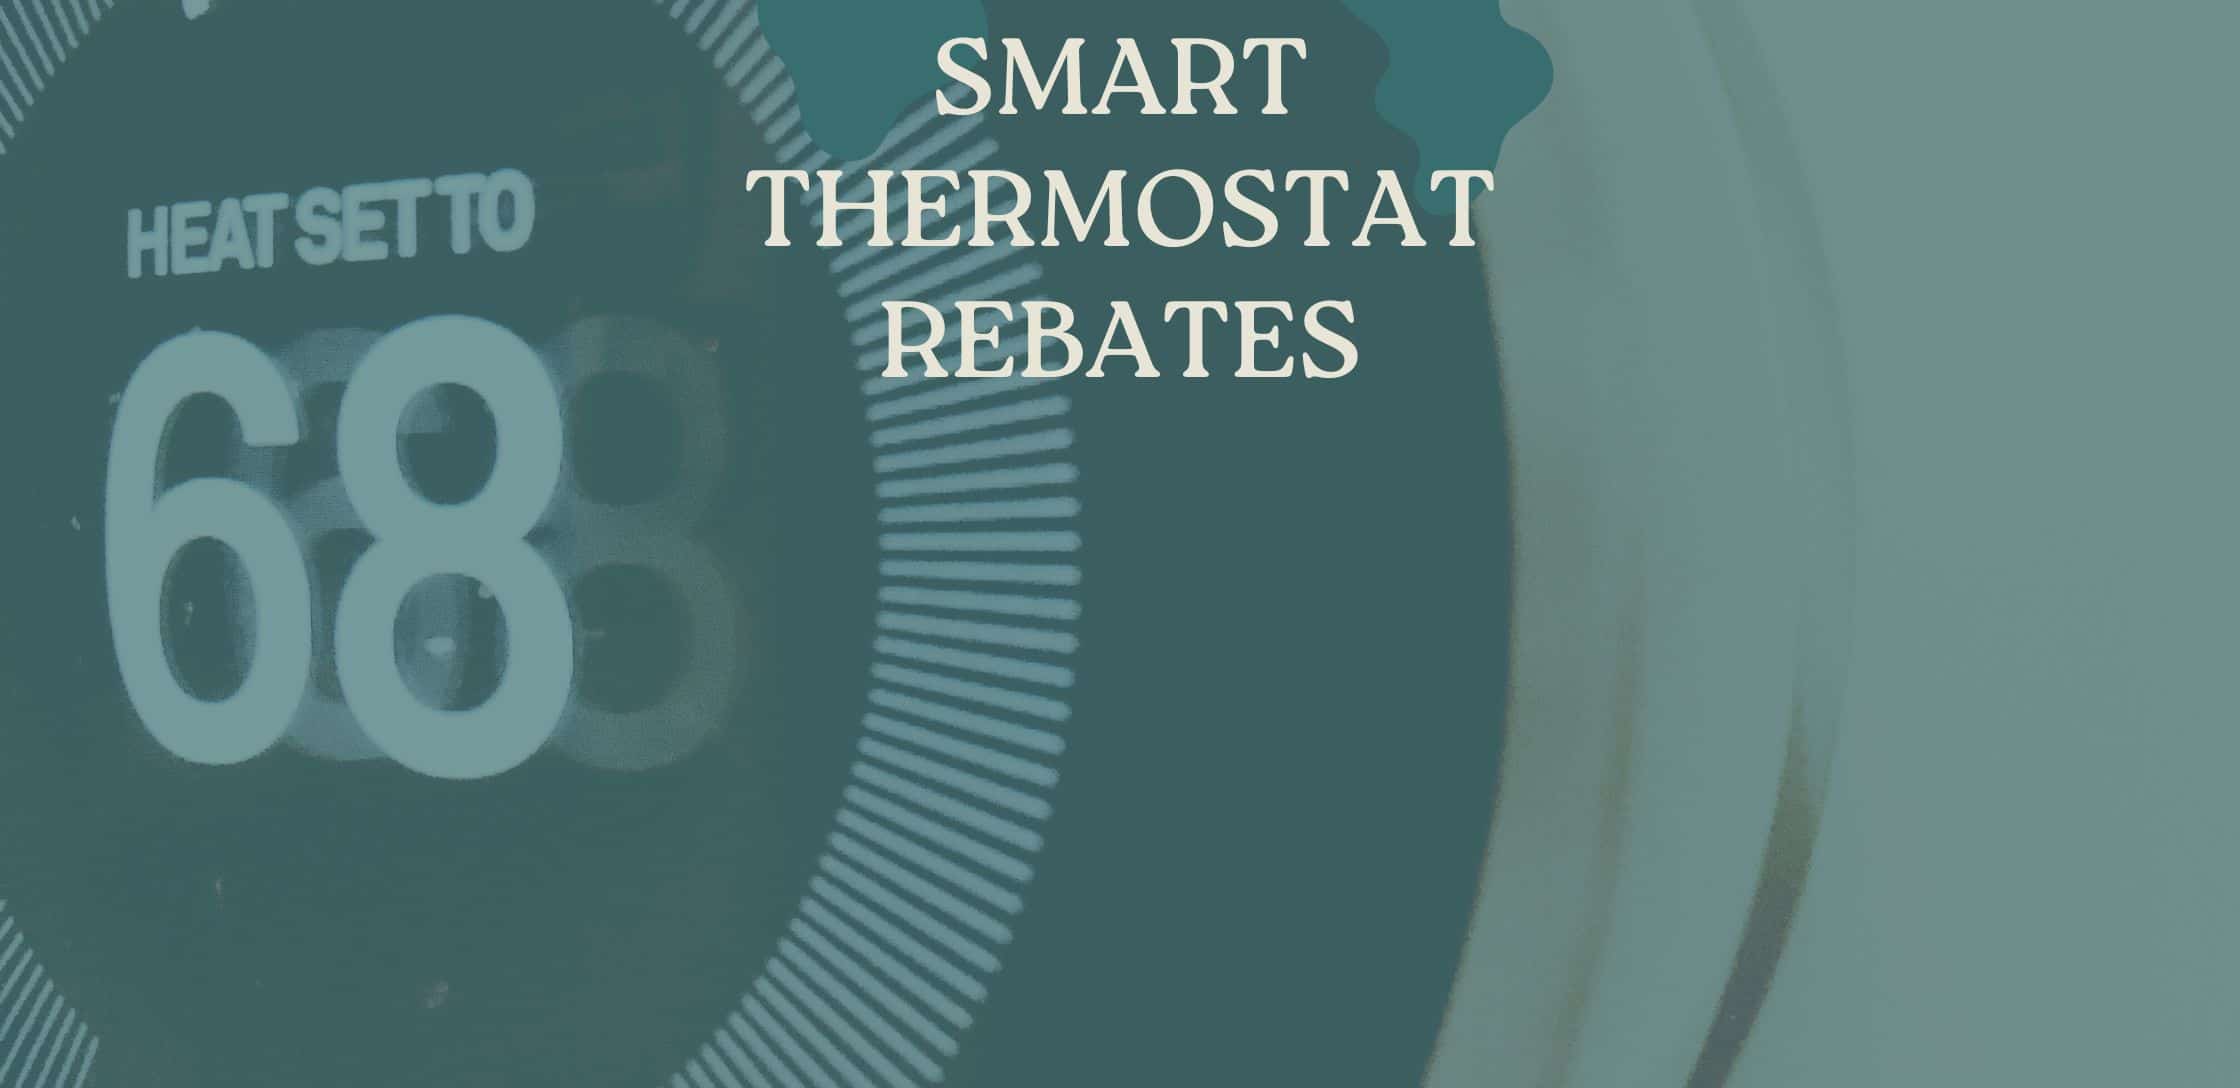 earn-an-85-rebate-on-select-smart-thermostats